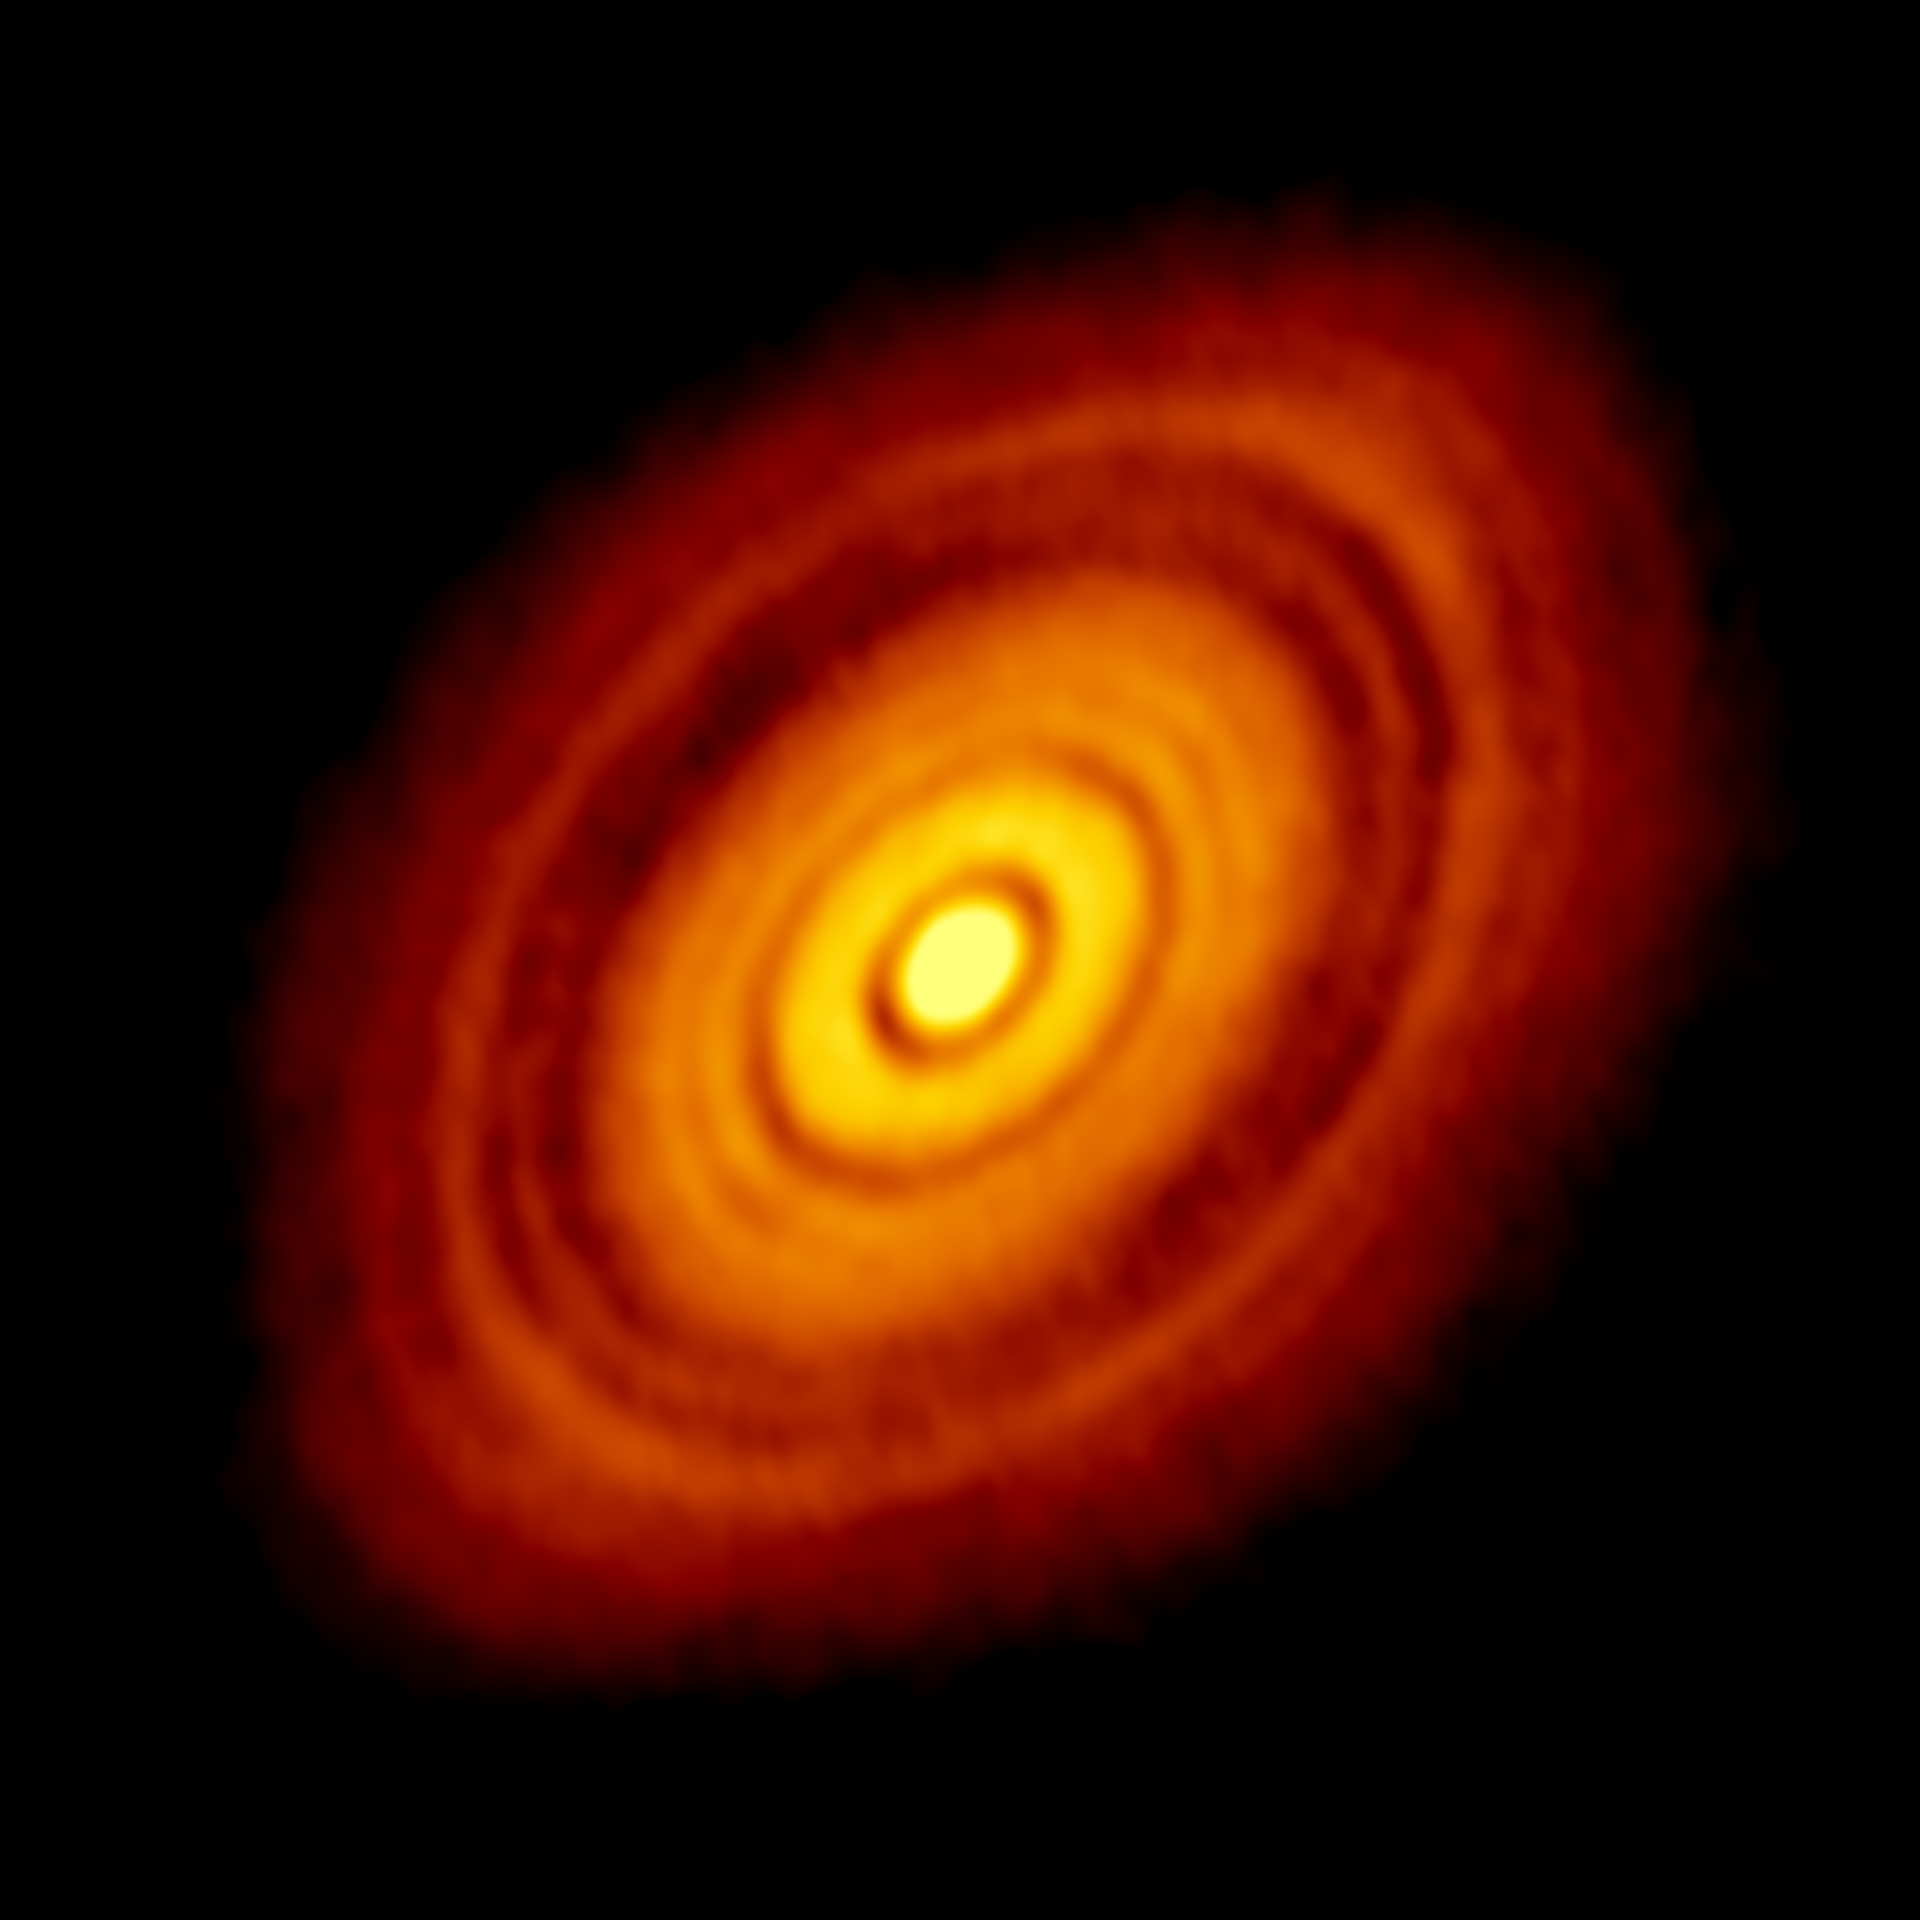 <p>ALMA image of the young star HL Tau and its protoplanetary disk. This best image ever of planet formation reveals multiple rings and gaps that herald the presence of emerging planets as they sweep their orbits clear of dust and gas. Credit: ALMA(ESO/NAOJ/NRAO); C. Brogan, B. Saxton (NRAO/AUI/NSF)</p>
